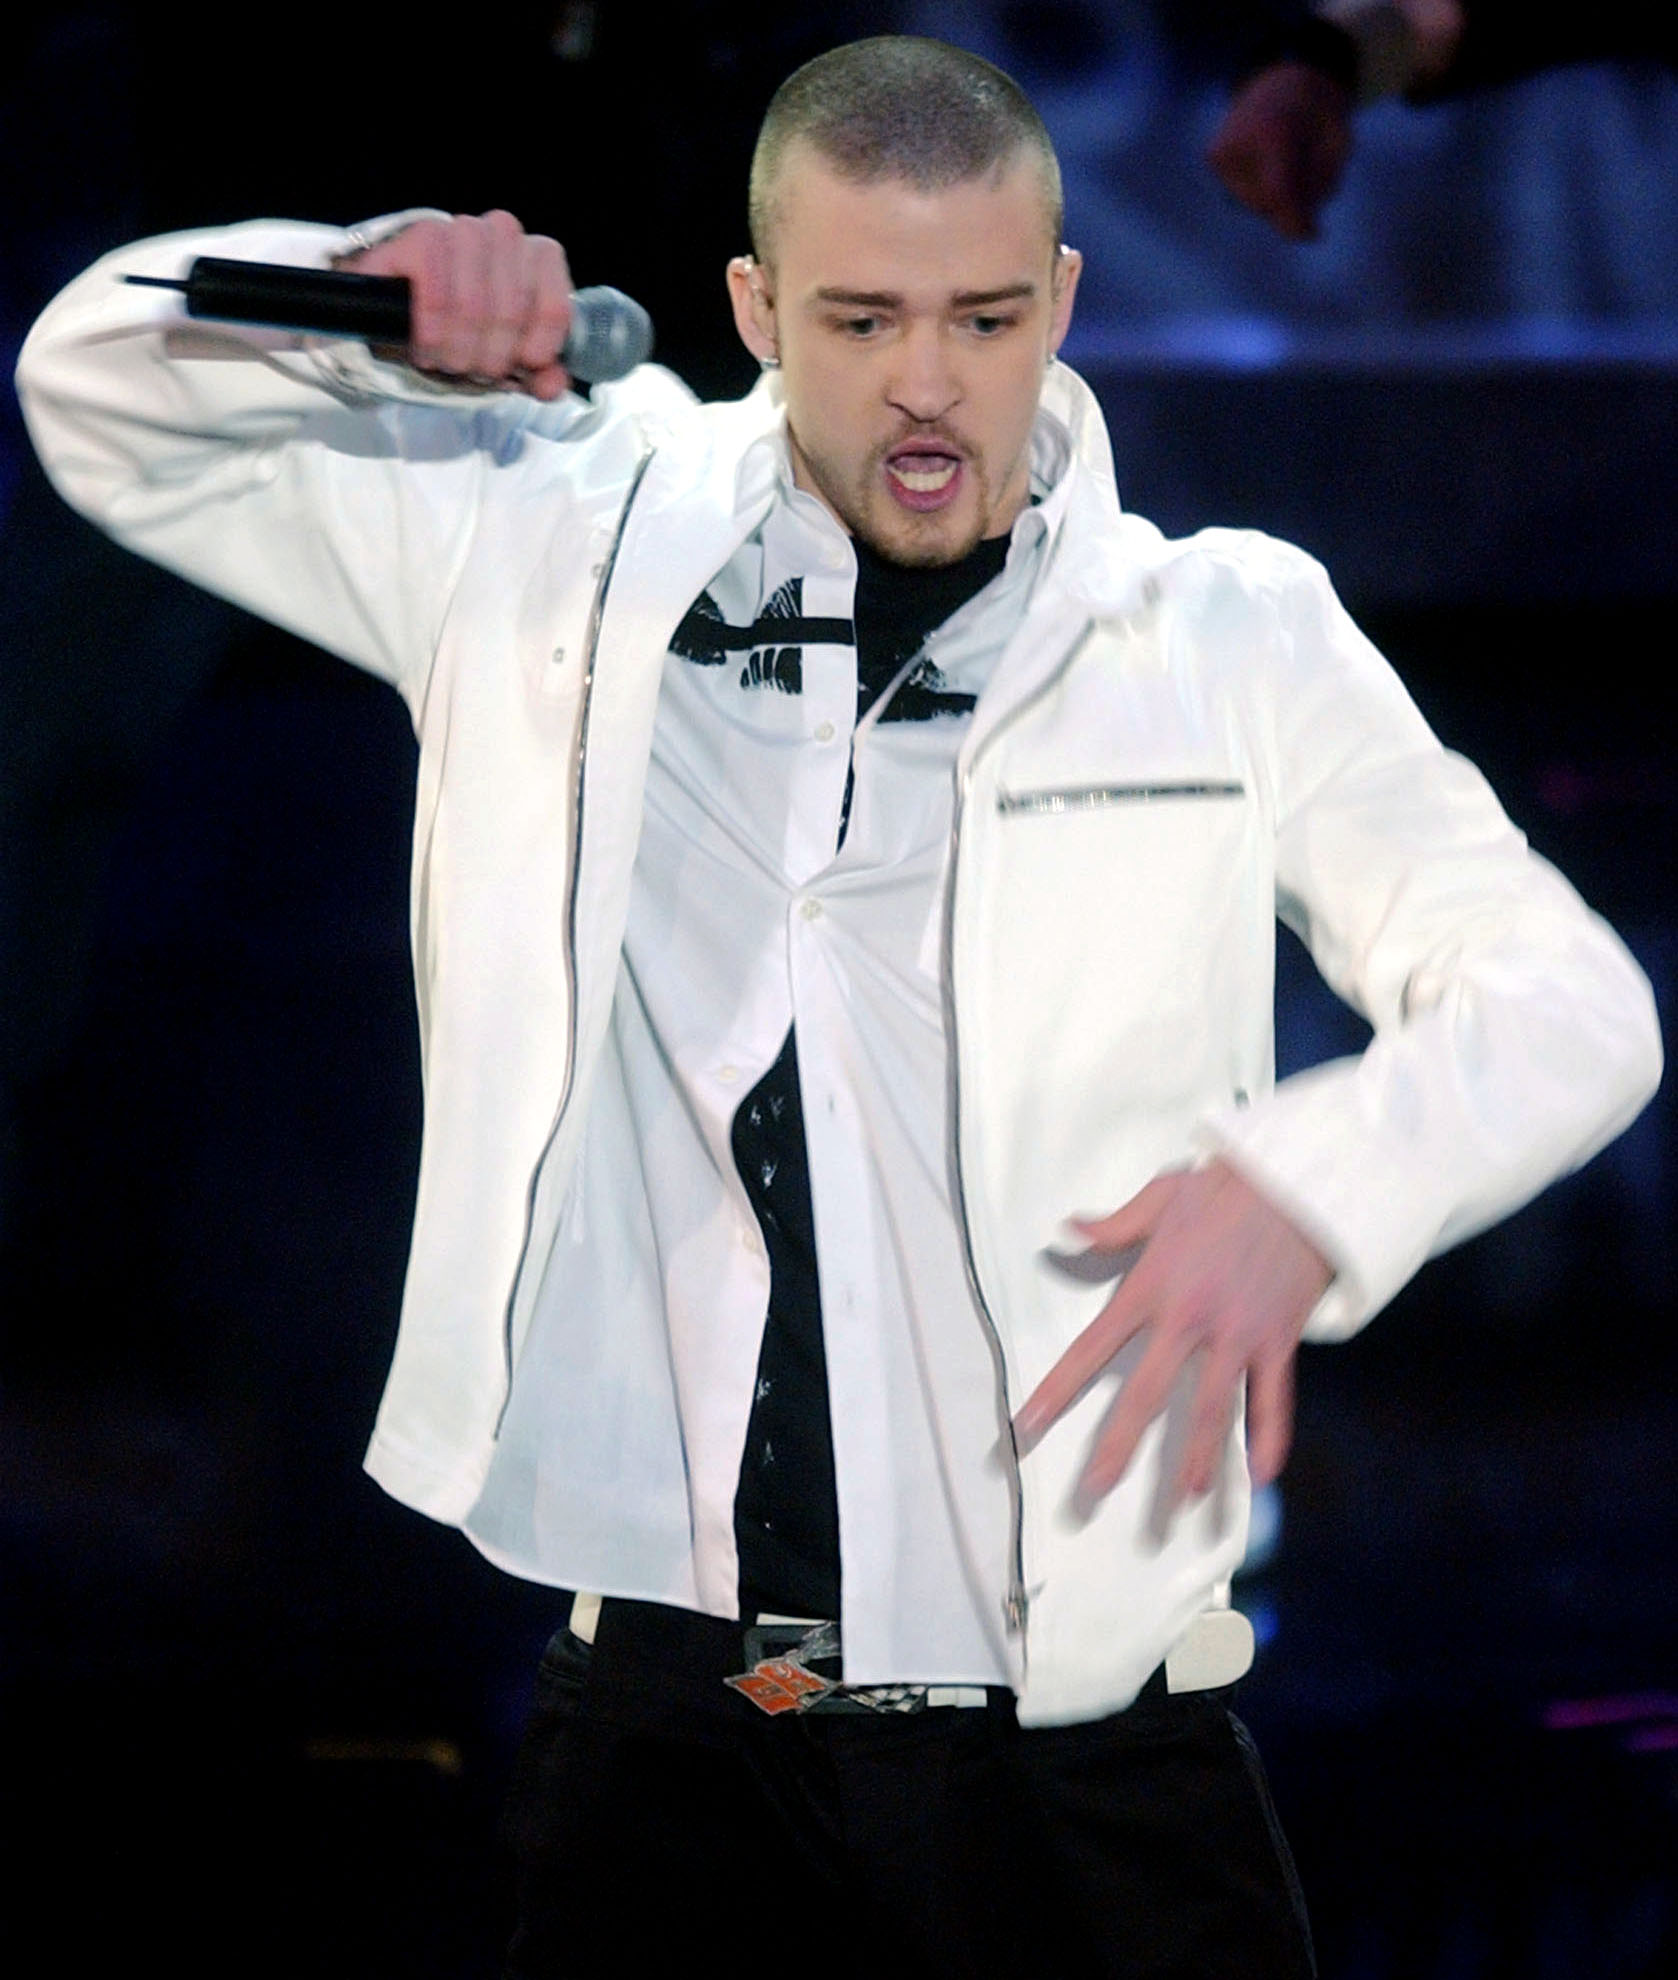 Justin Timberlake performs a medley of "Cry Me A River/Rock Your Body/Like I Love You," at the 17th annual Soul Train Music Awards, which was broadcast live in first-run national syndication on March 1, 2003 from the Pasadena Civic Auditorium in Pasadena, California. REUTERS/Jim Ruymen JR